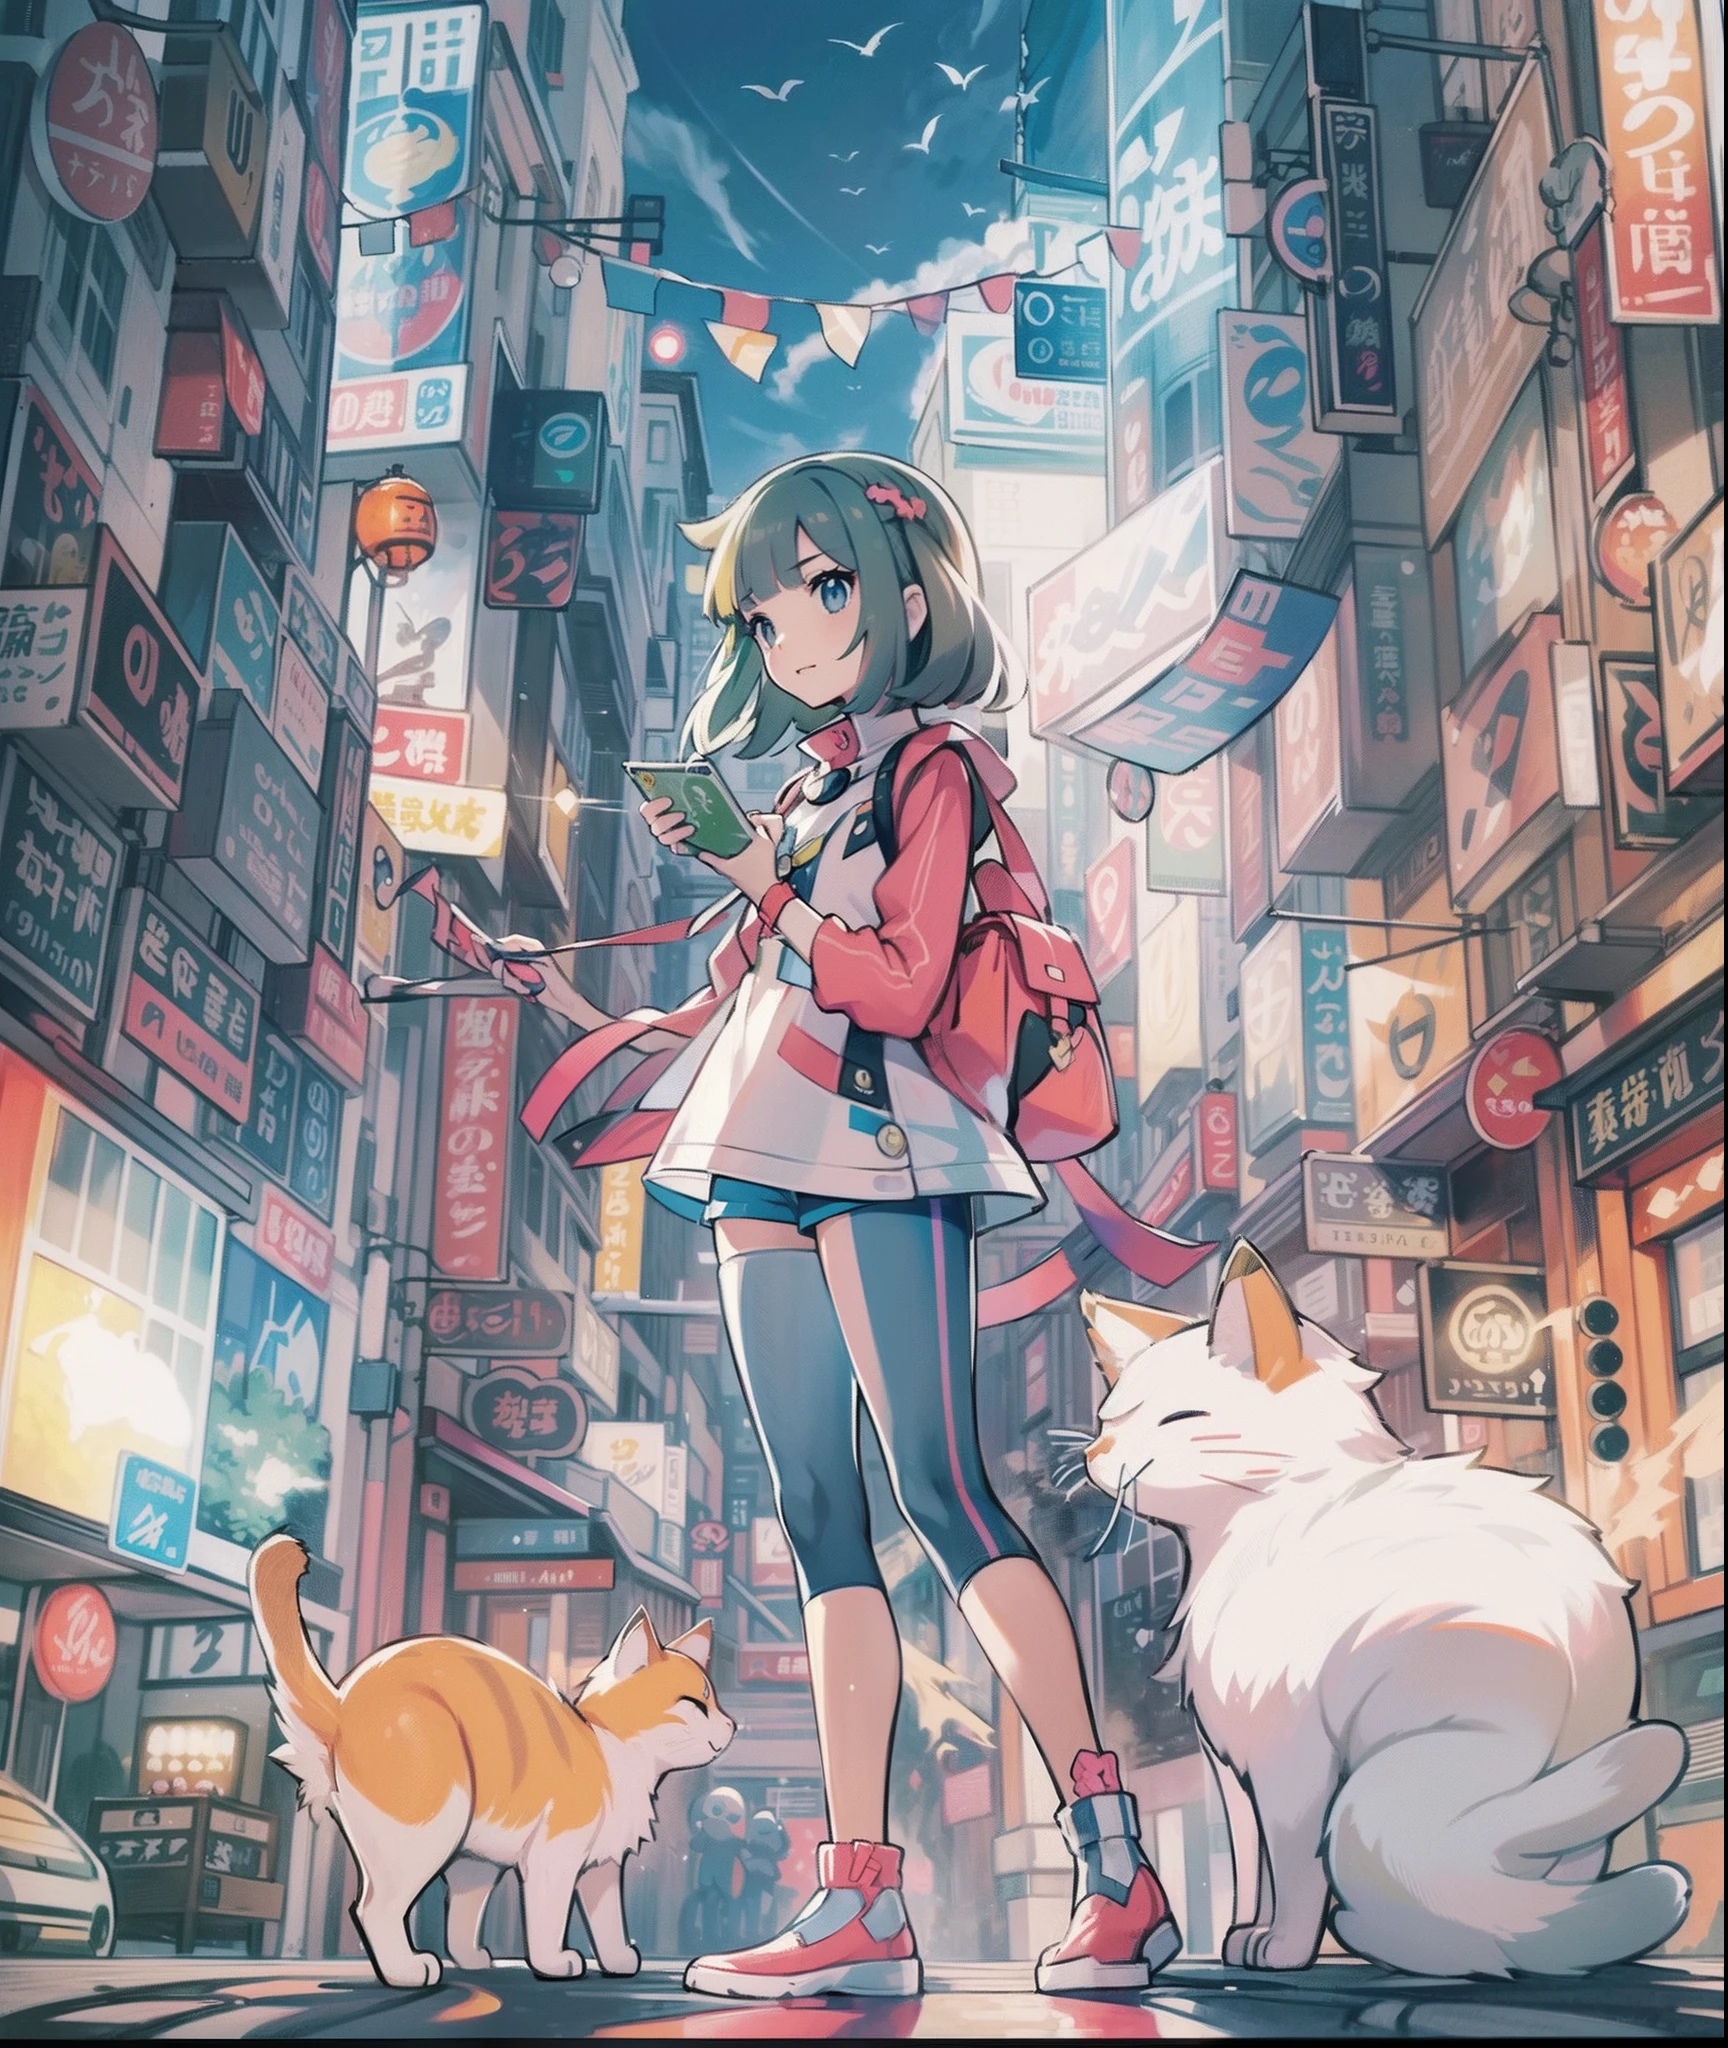 profile、1girl in,A pokémon_The card,(top-quality), (high_quality), (Convoluted_Details), (ultra-detailliert), (illustratio), (Distinct_image),saito_naoki,city scenery、Rainbow View、With cats（（Cute cat１.５））(white background:1.15), ::2]solo, mid shot, full body,